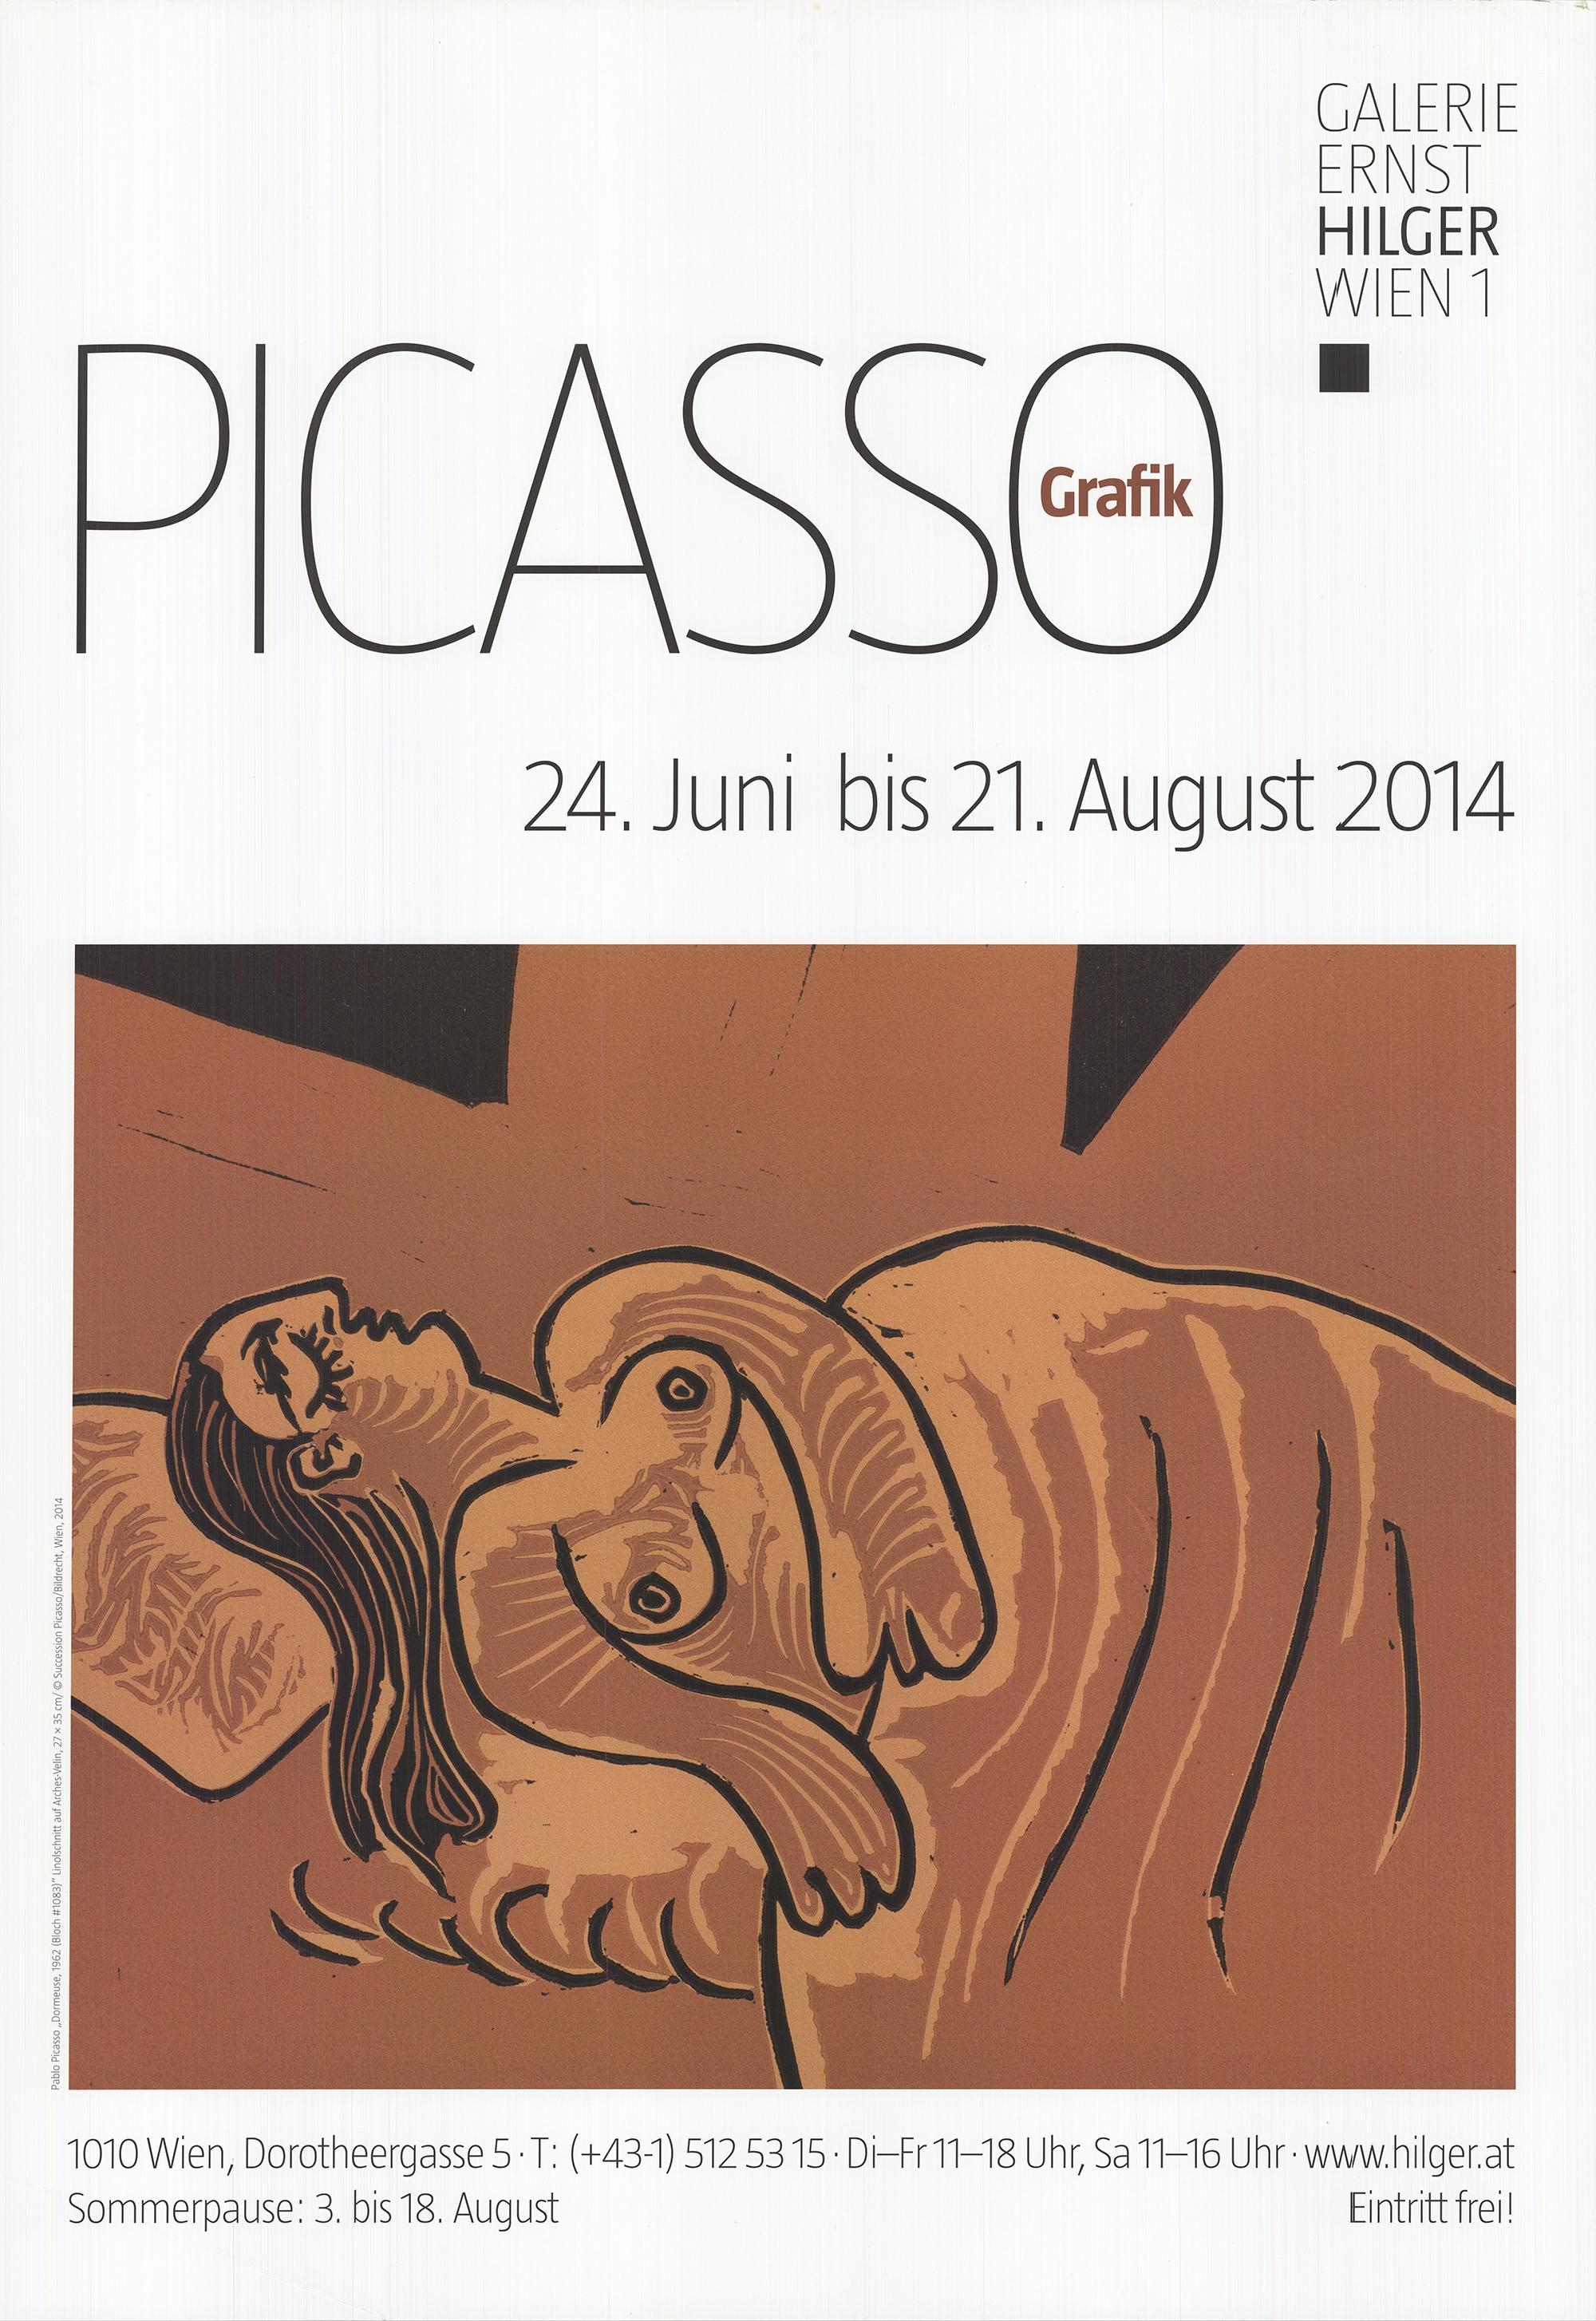 PABLO PICASSO Dormeuse 33" x 23.5" Offset Lithograph 2014 Modernism Brown, Black - Print by (after) Pablo Picasso